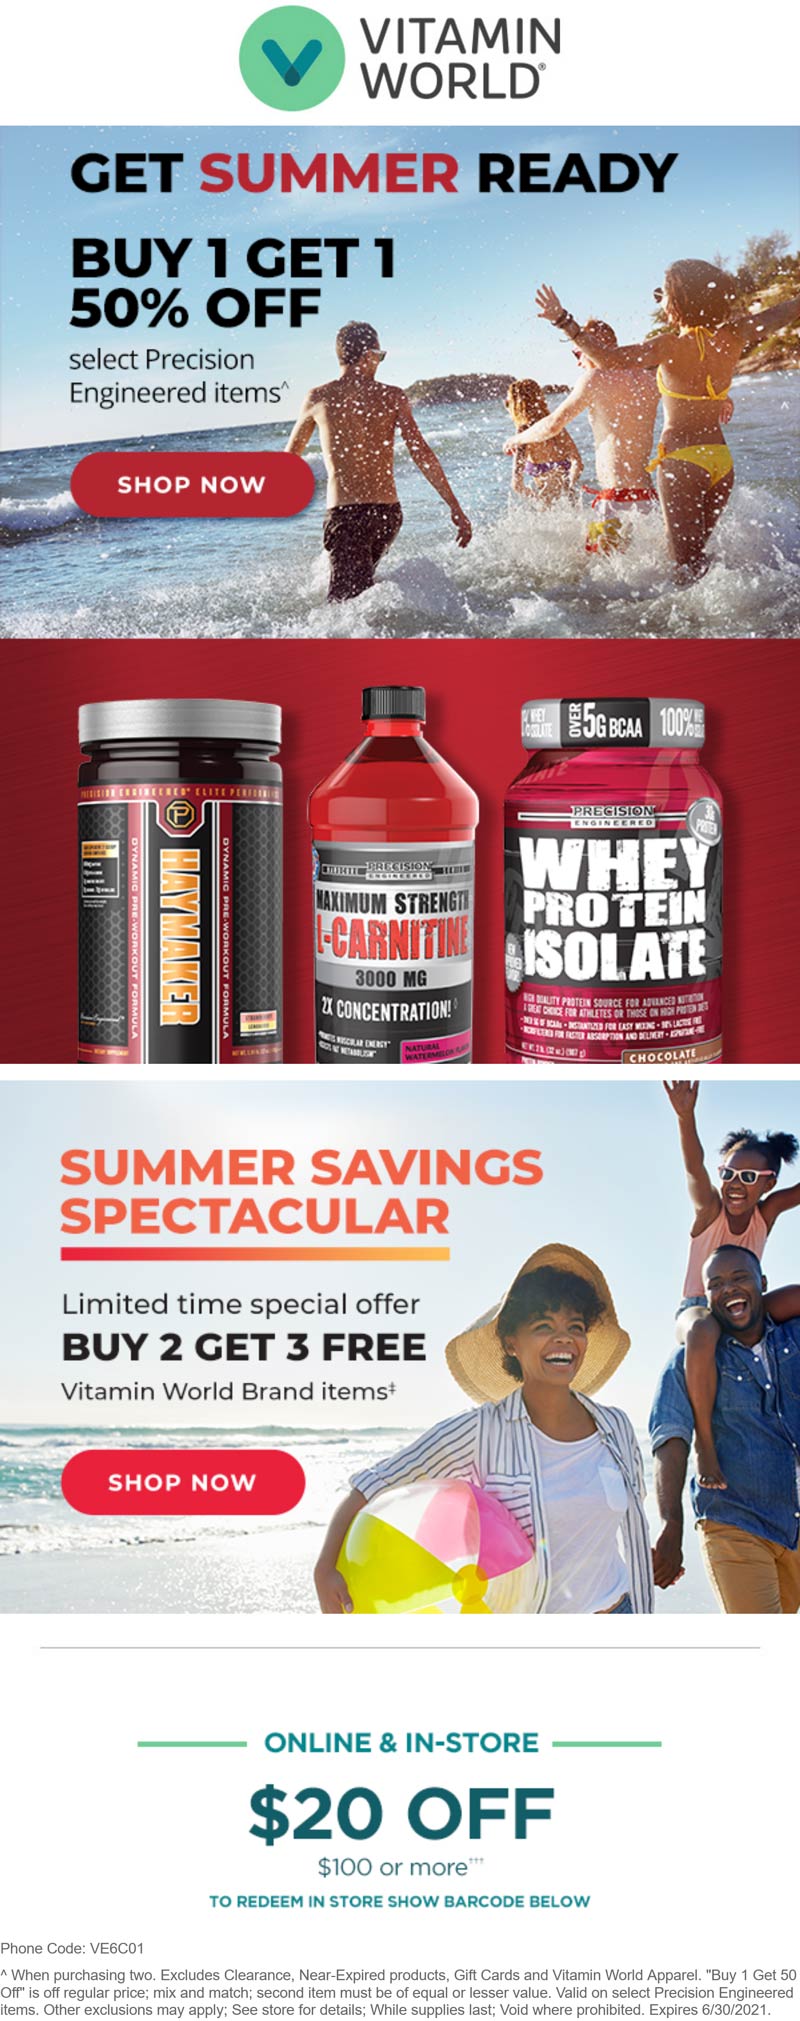 Vitamin World stores Coupon  5-for-2 on store brand items + $20 off $100 at Vitamin World, or online via promo code VE6C01 #vitaminworld 